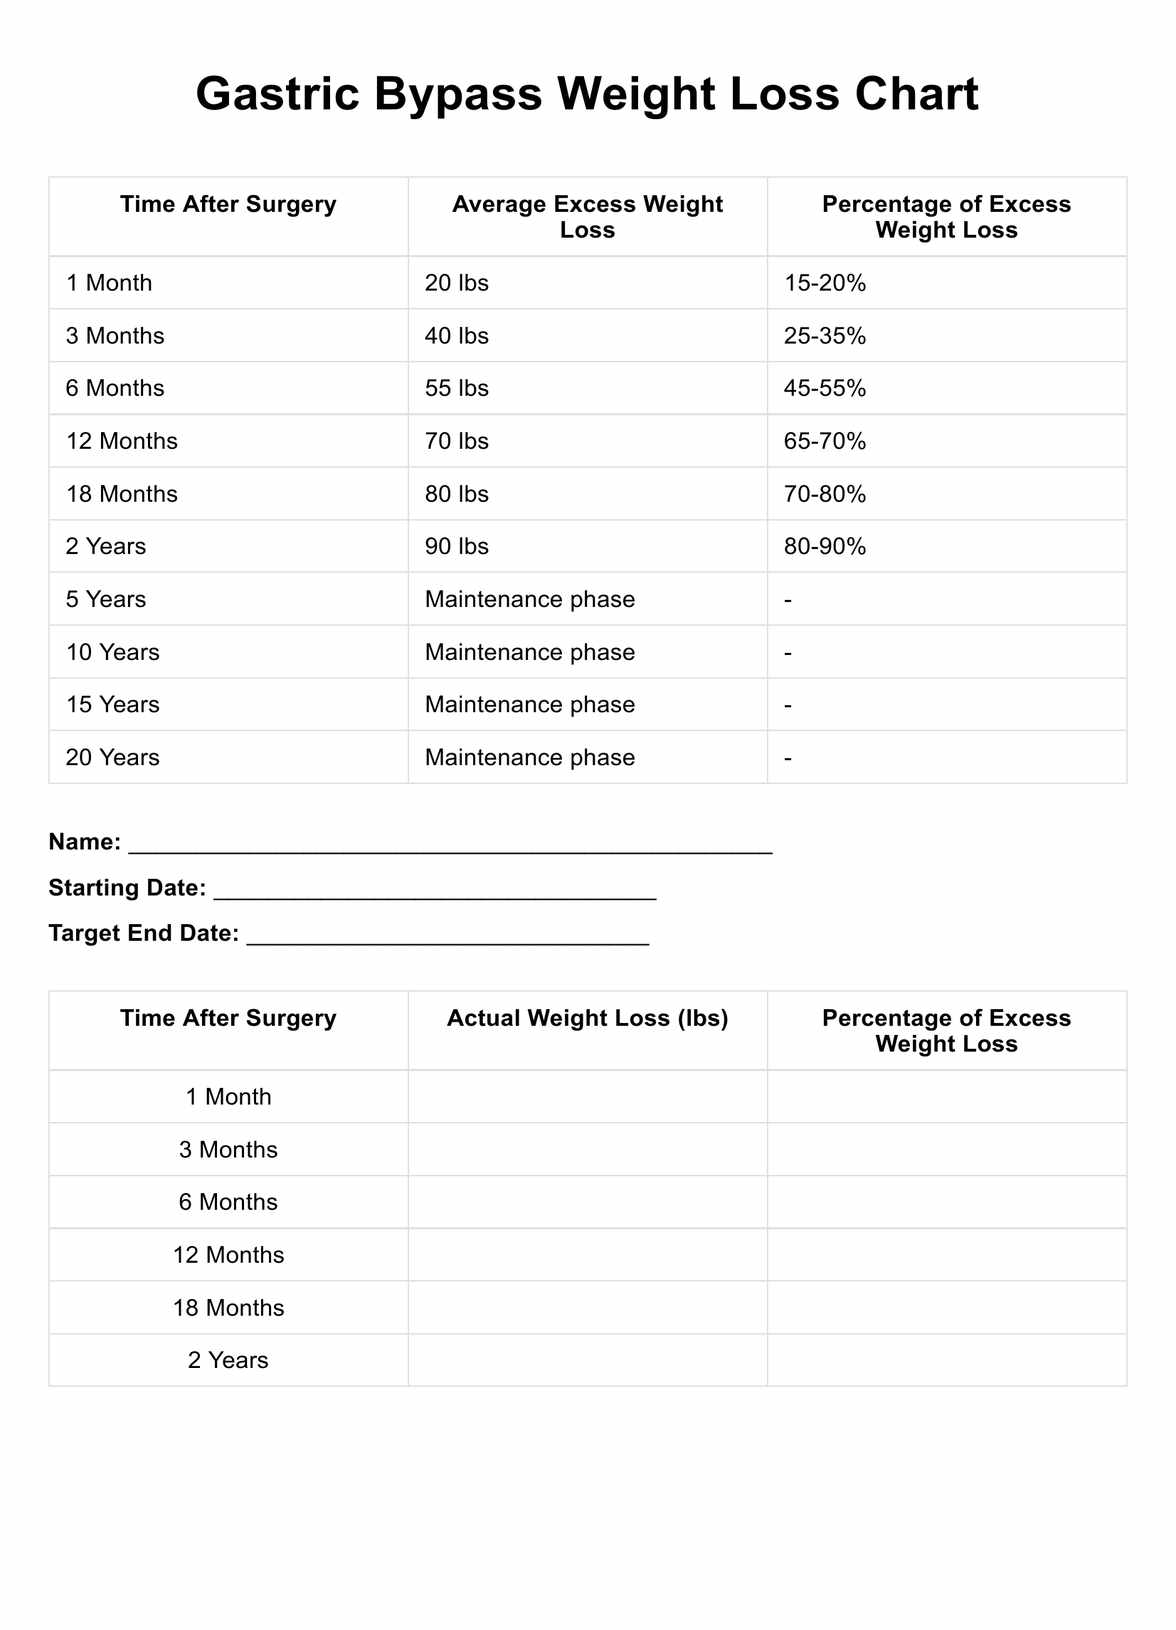 Gastric Bypass Weight Loss Chart PDF Example